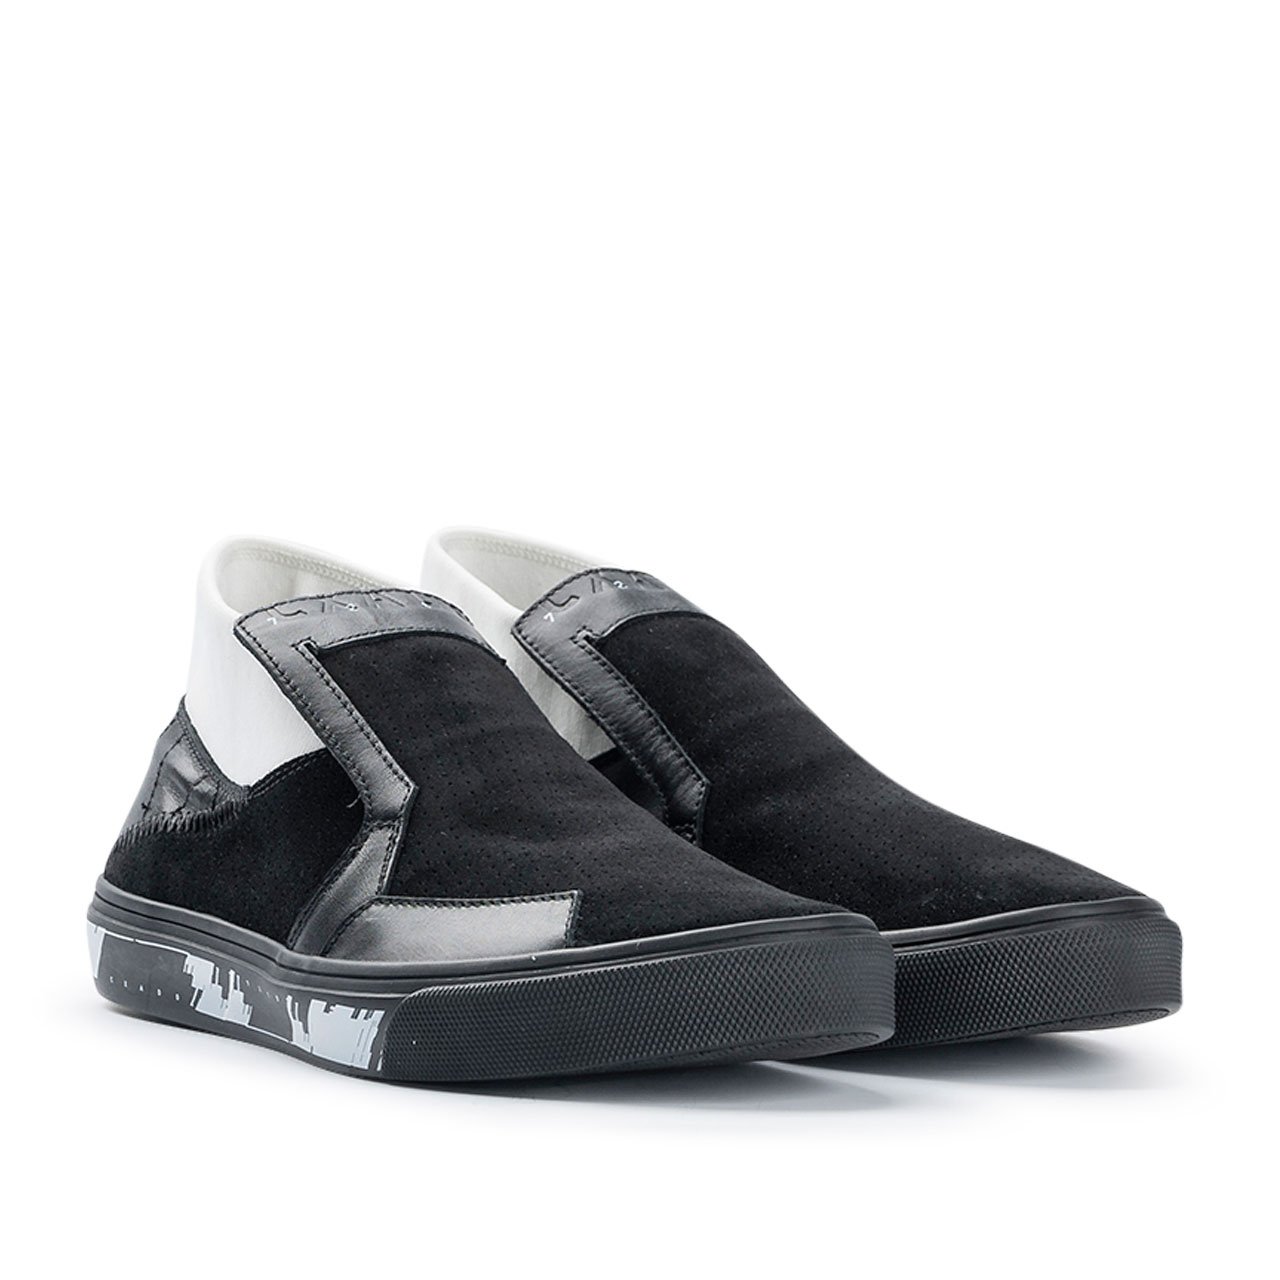 stone island shadow project slip-on mid leather (black) - 7219s0123.v0029 - a.plus - Image - 2